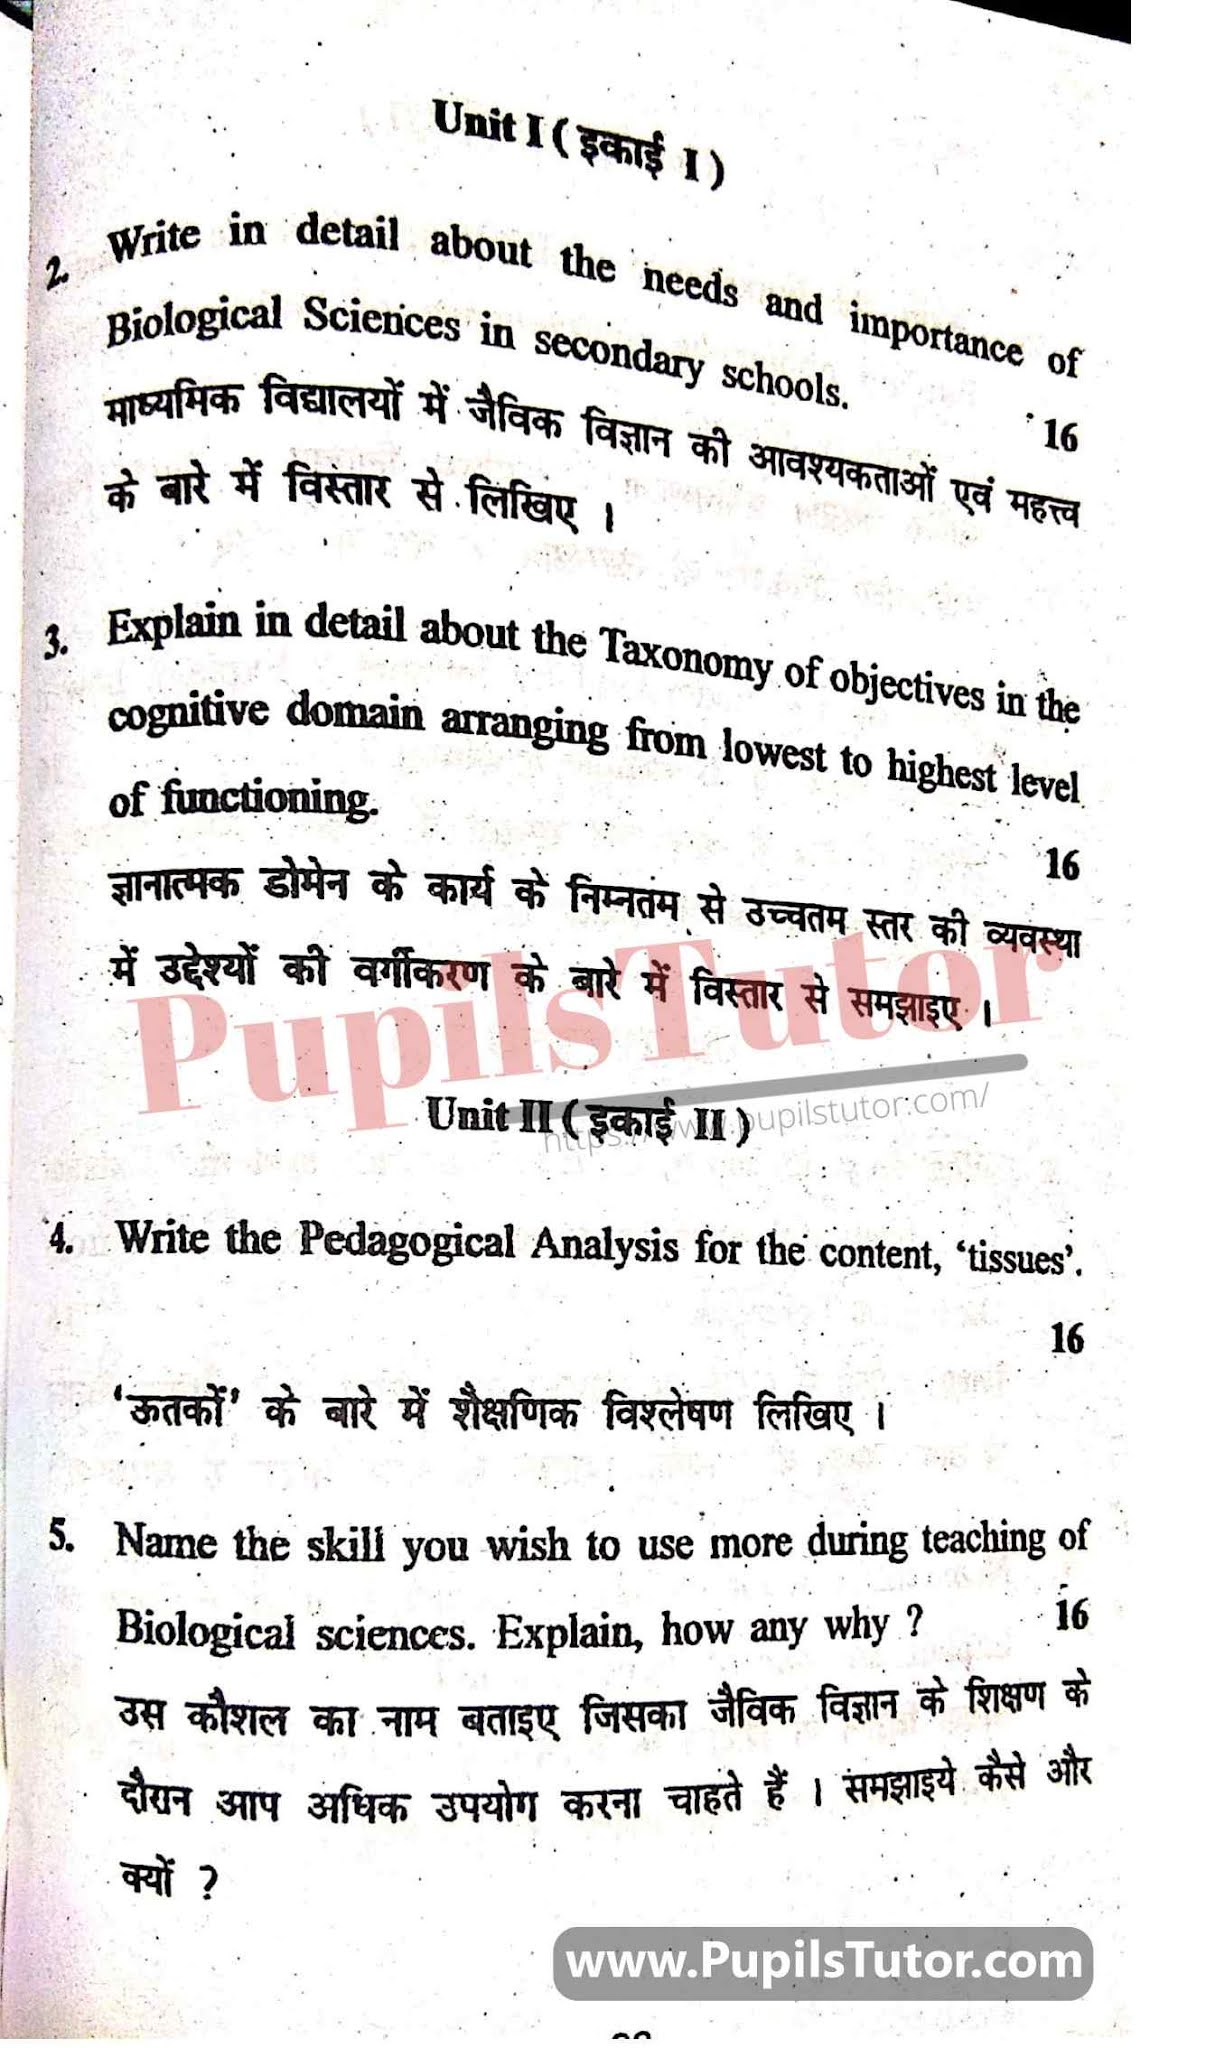 KUK (Kurukshetra University, Haryana) Pedagogy Of Biological Science Question Paper 2019 For B.Ed 1st And 2nd Year And All The 4 Semesters In English And Hindi Medium Free Download PDF - Page 2 - www.pupilstutor.com